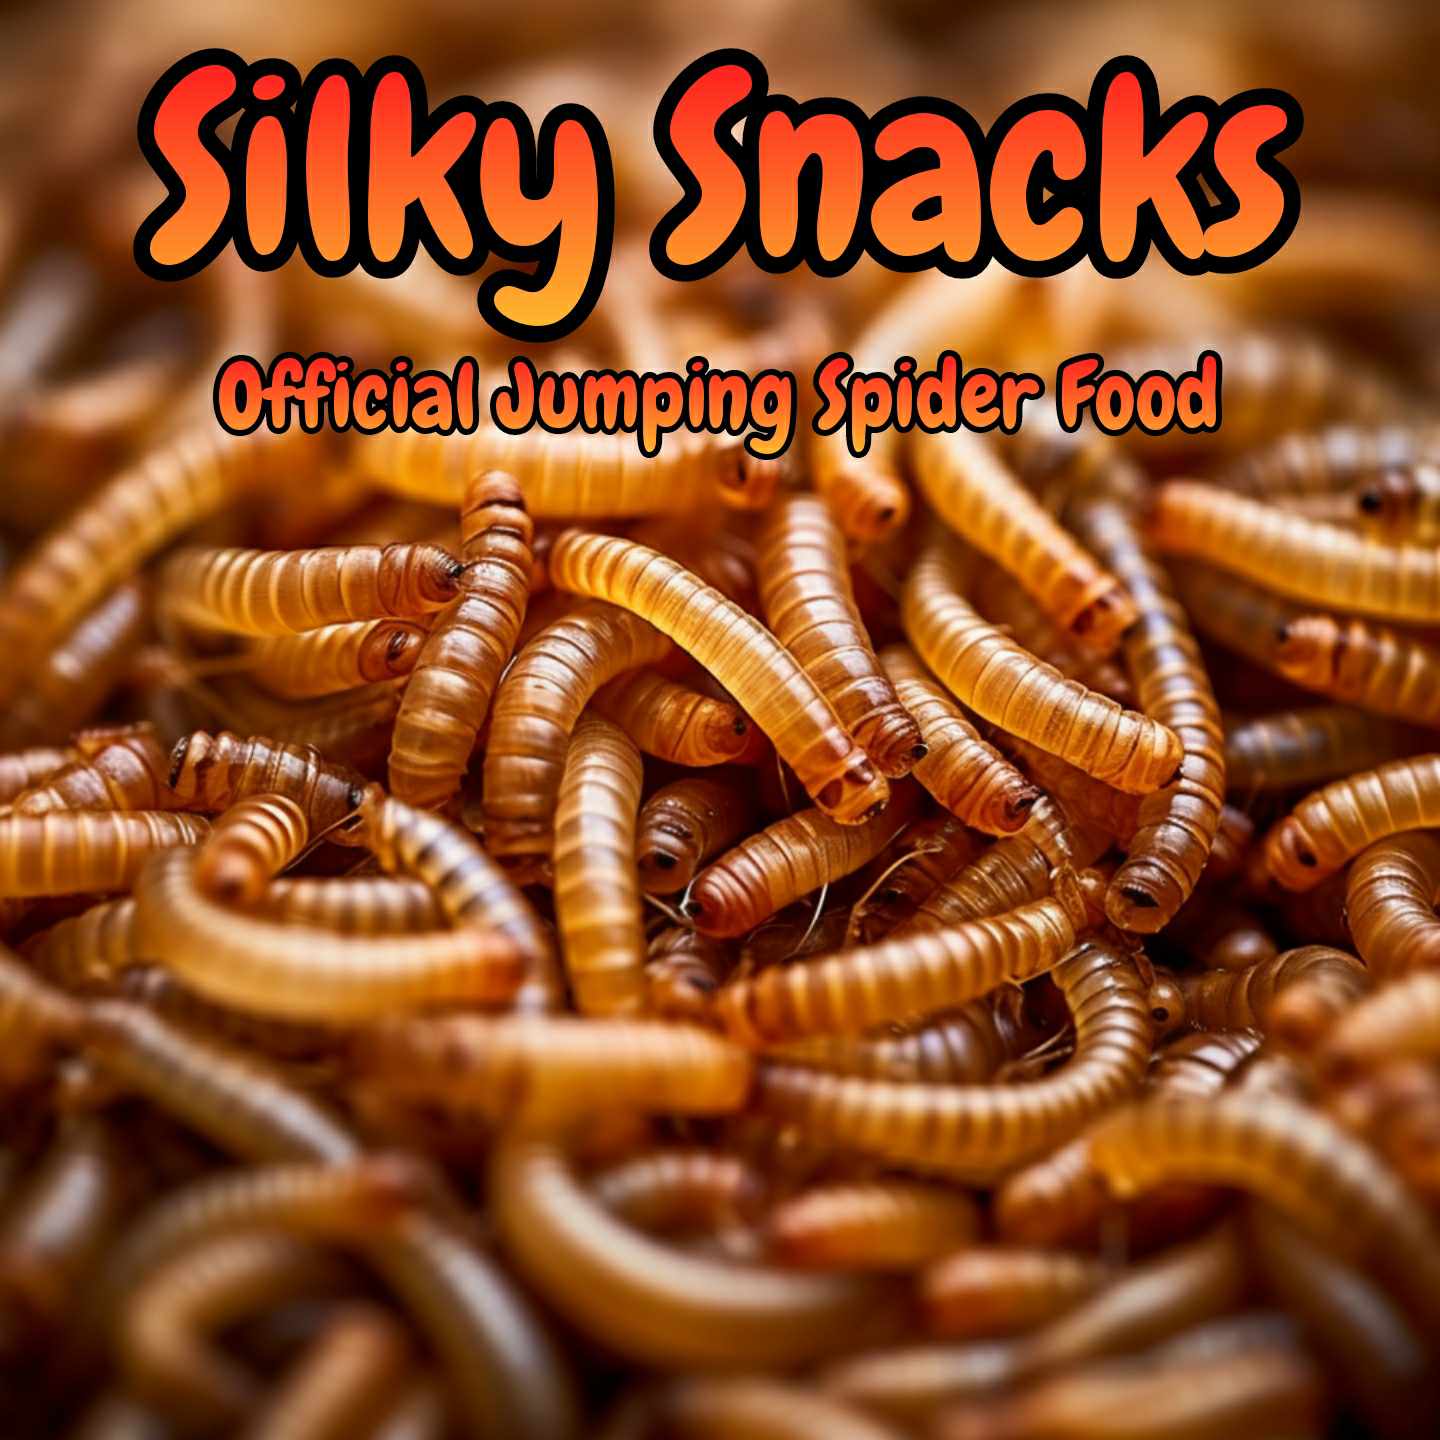 silky snacks, live mealworms for sale, spider feeder, jumping spider food